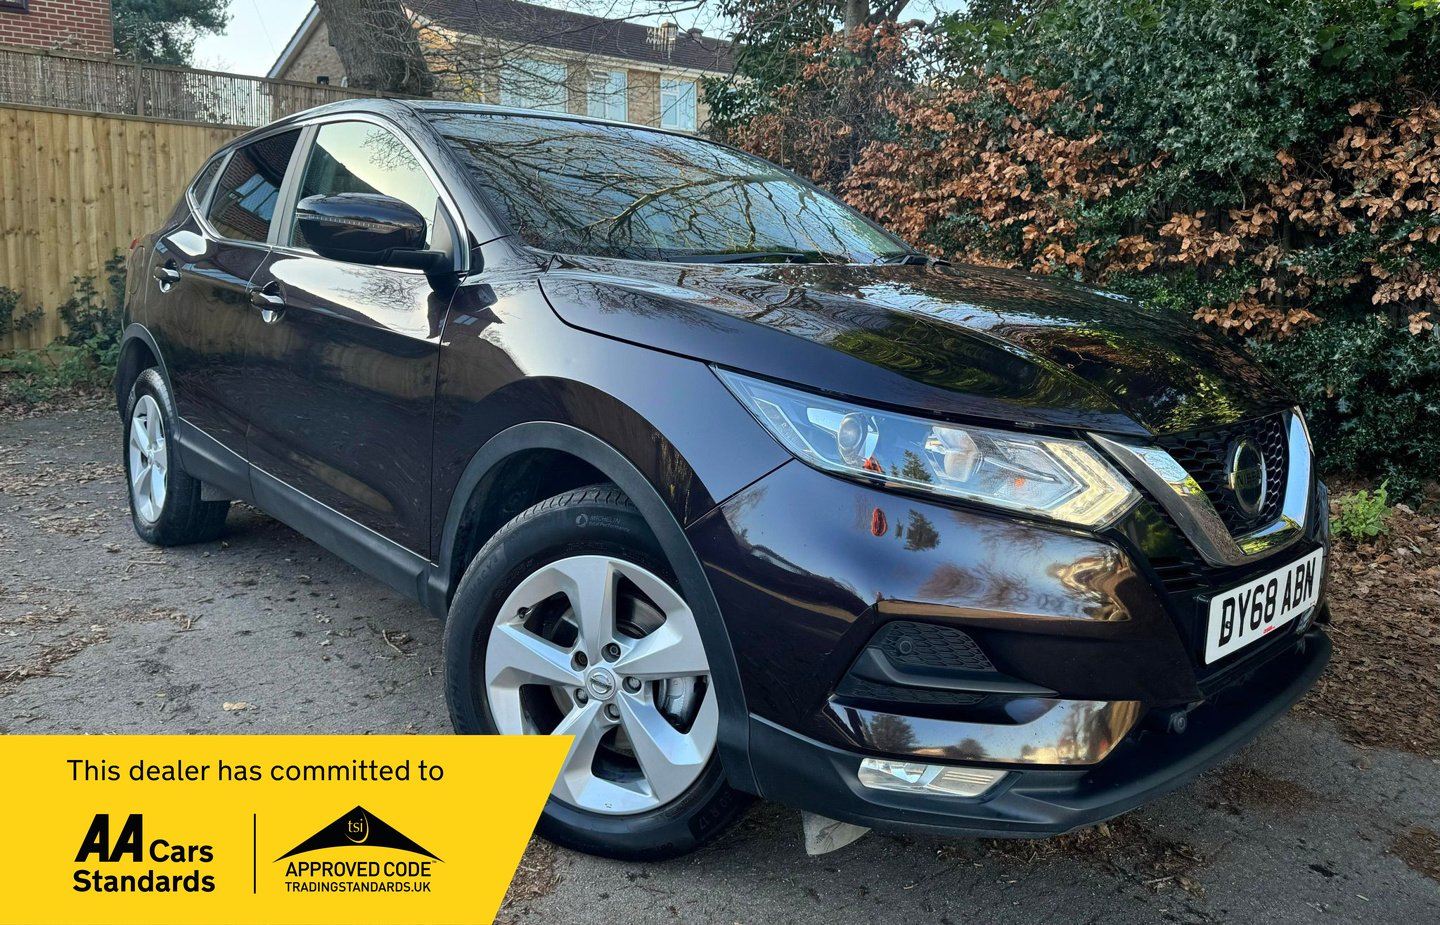 Used NISSAN QASHQAI in Bournemouth, Dorset